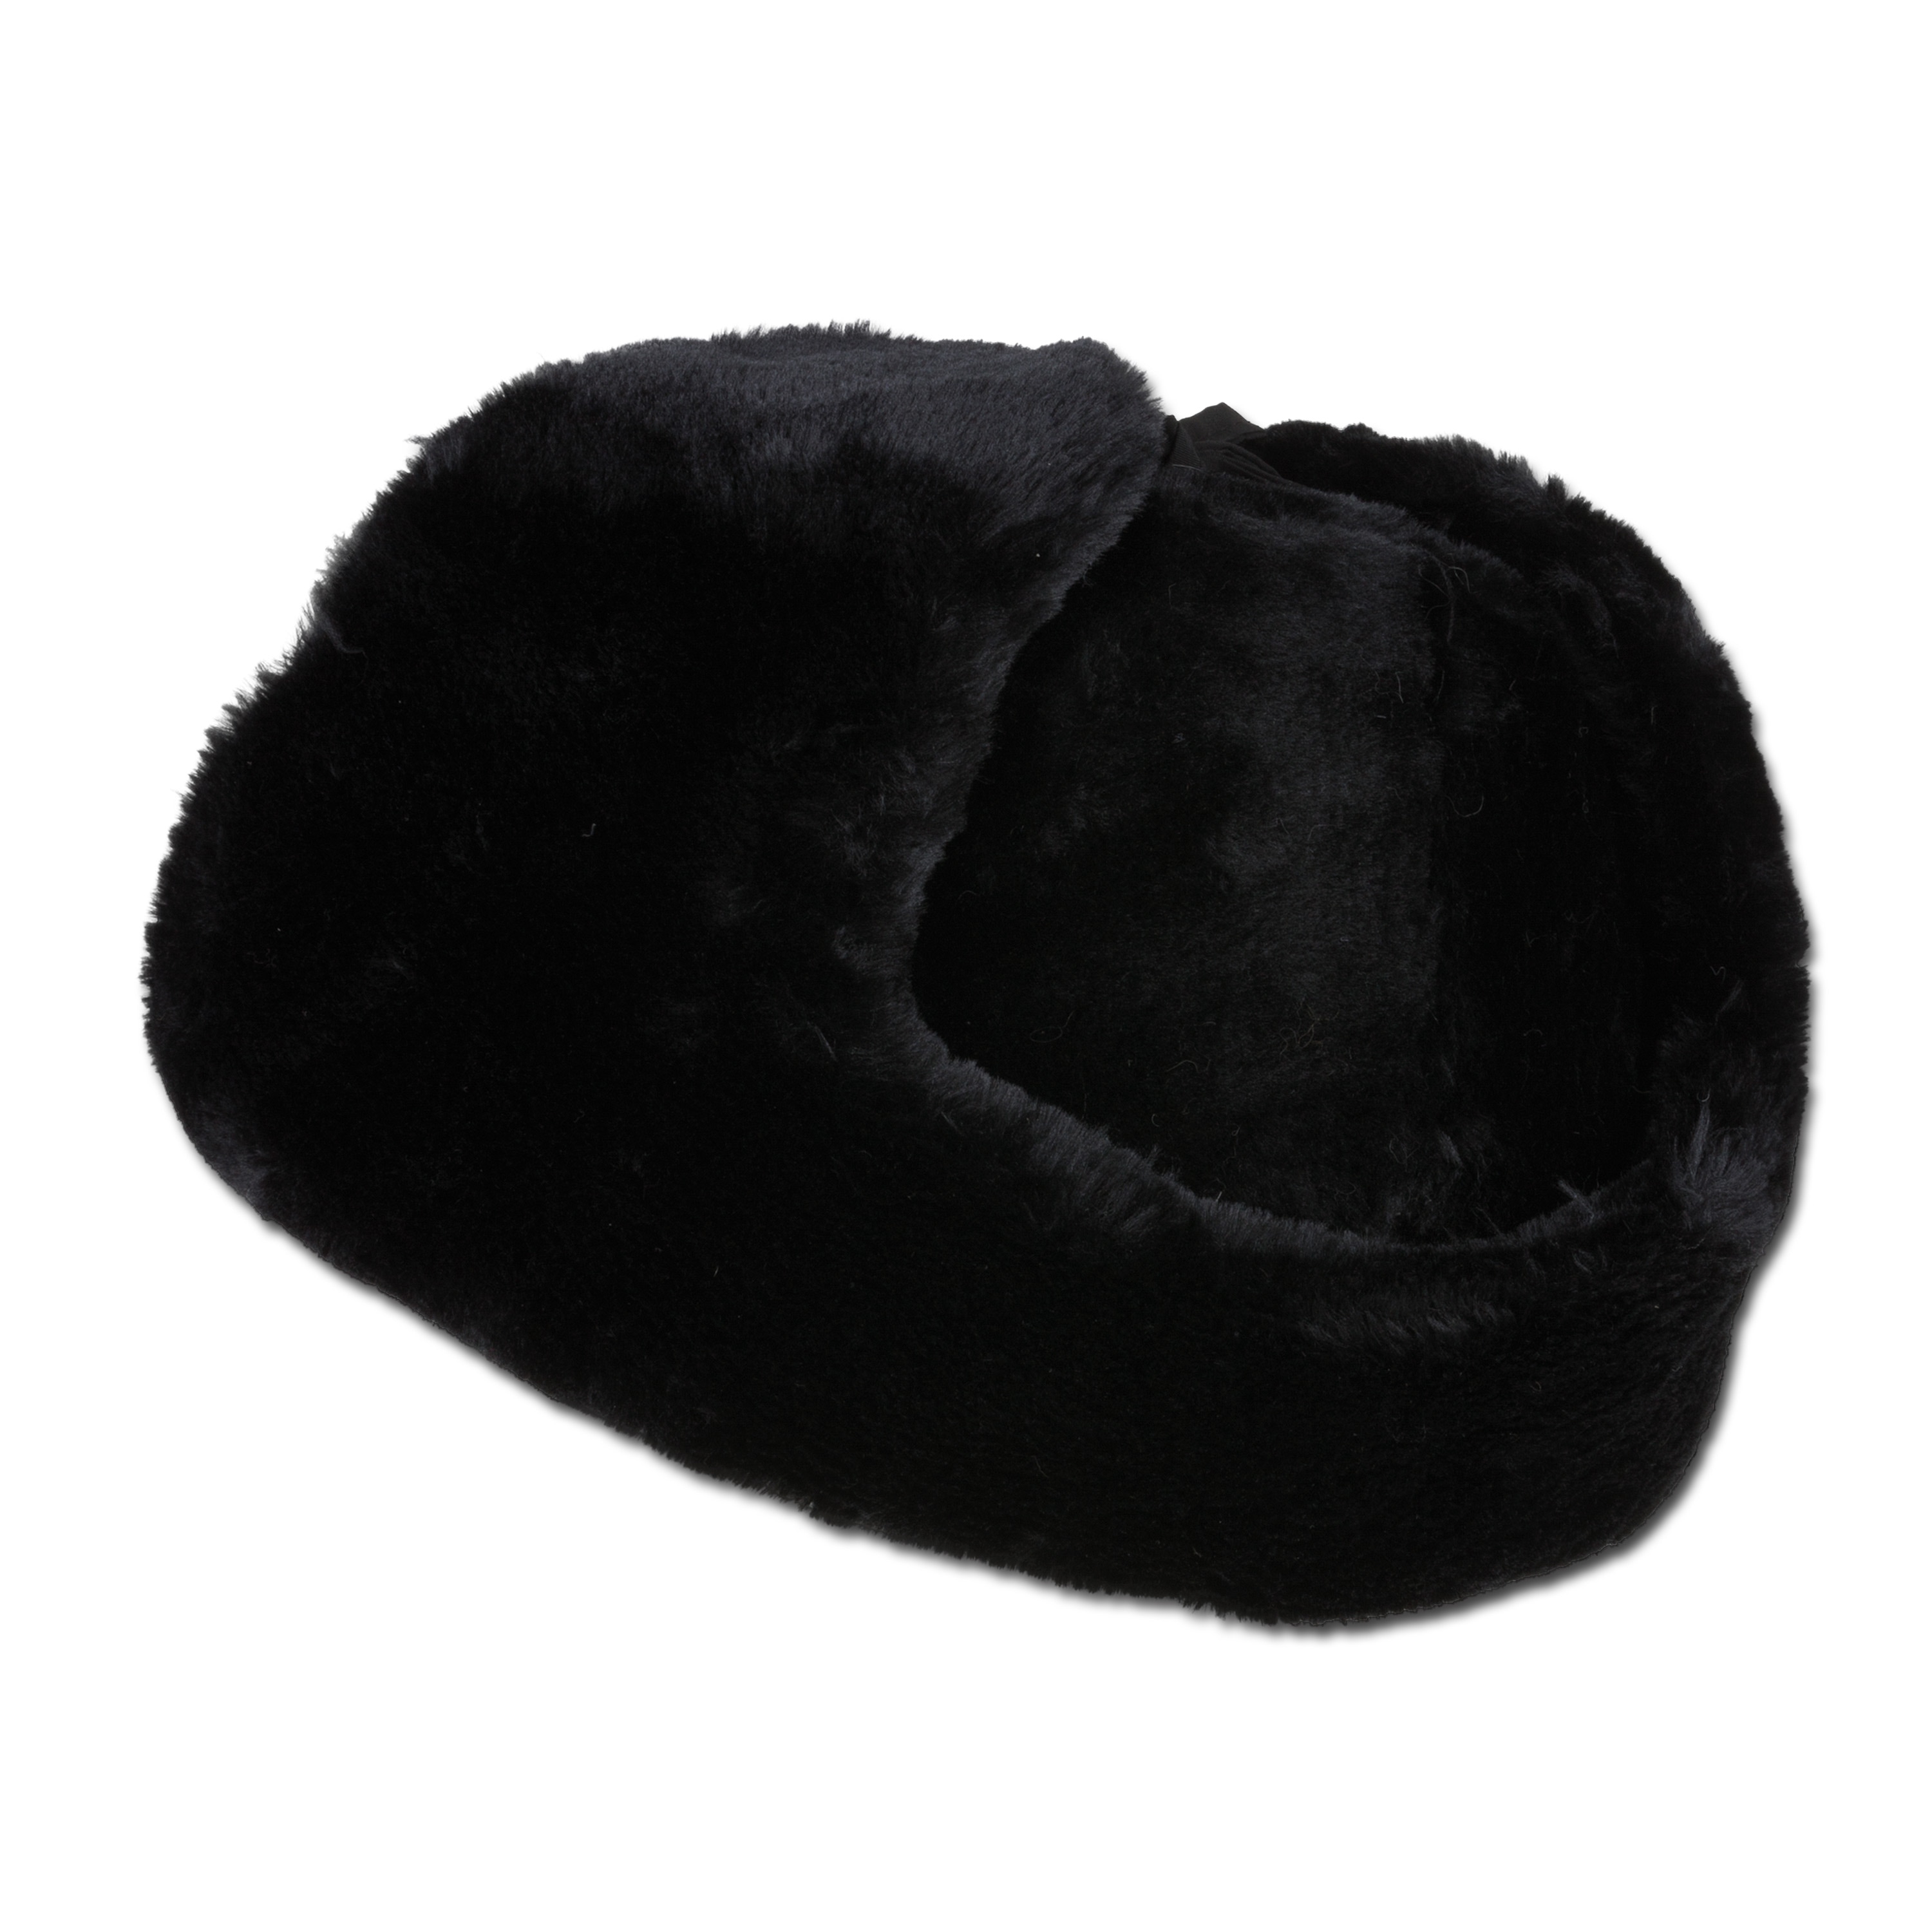 Russian Fur Hat With Insignia, black